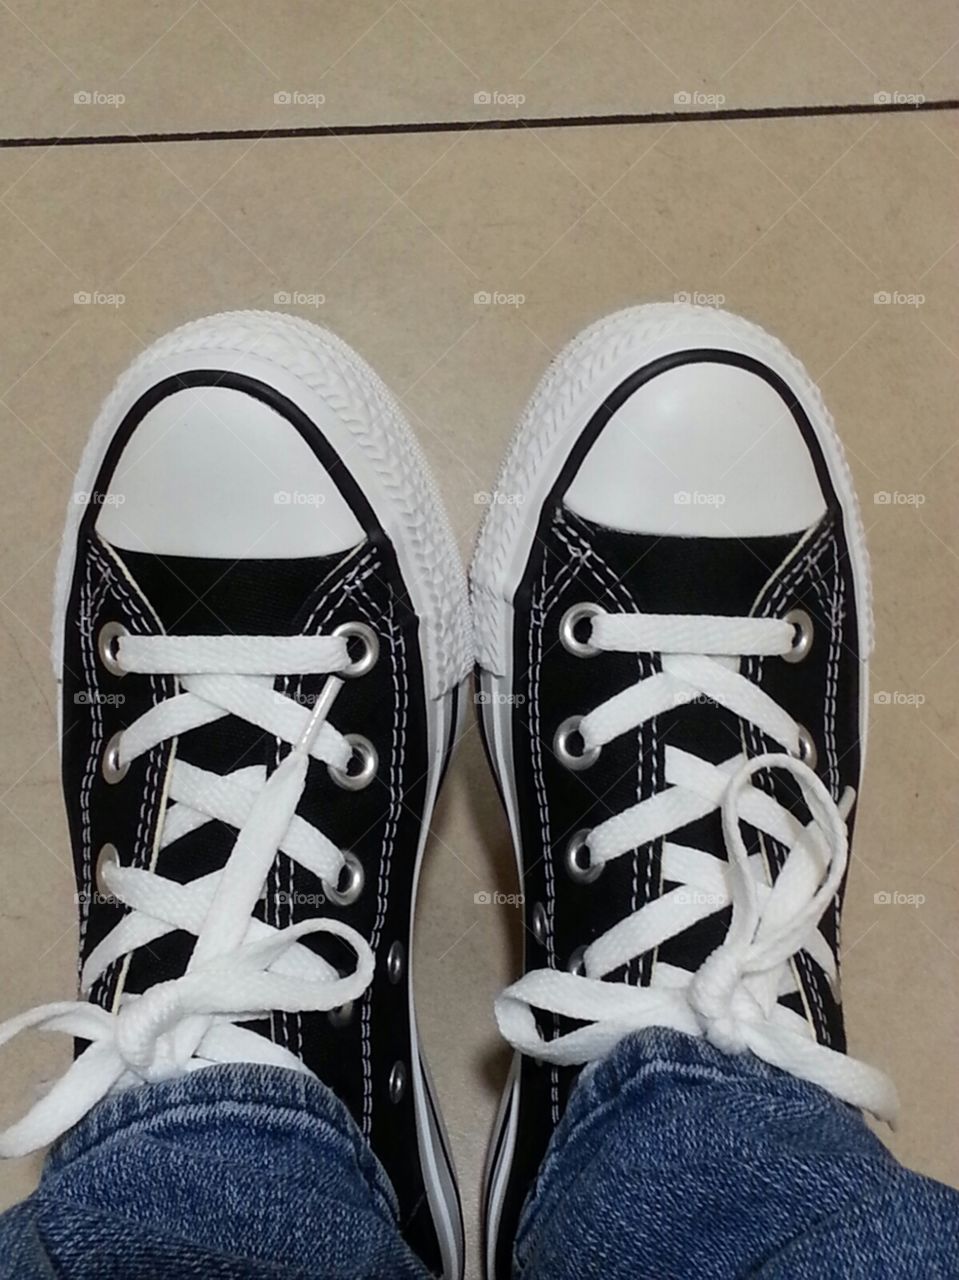 My Converse. Favorite shoes right here